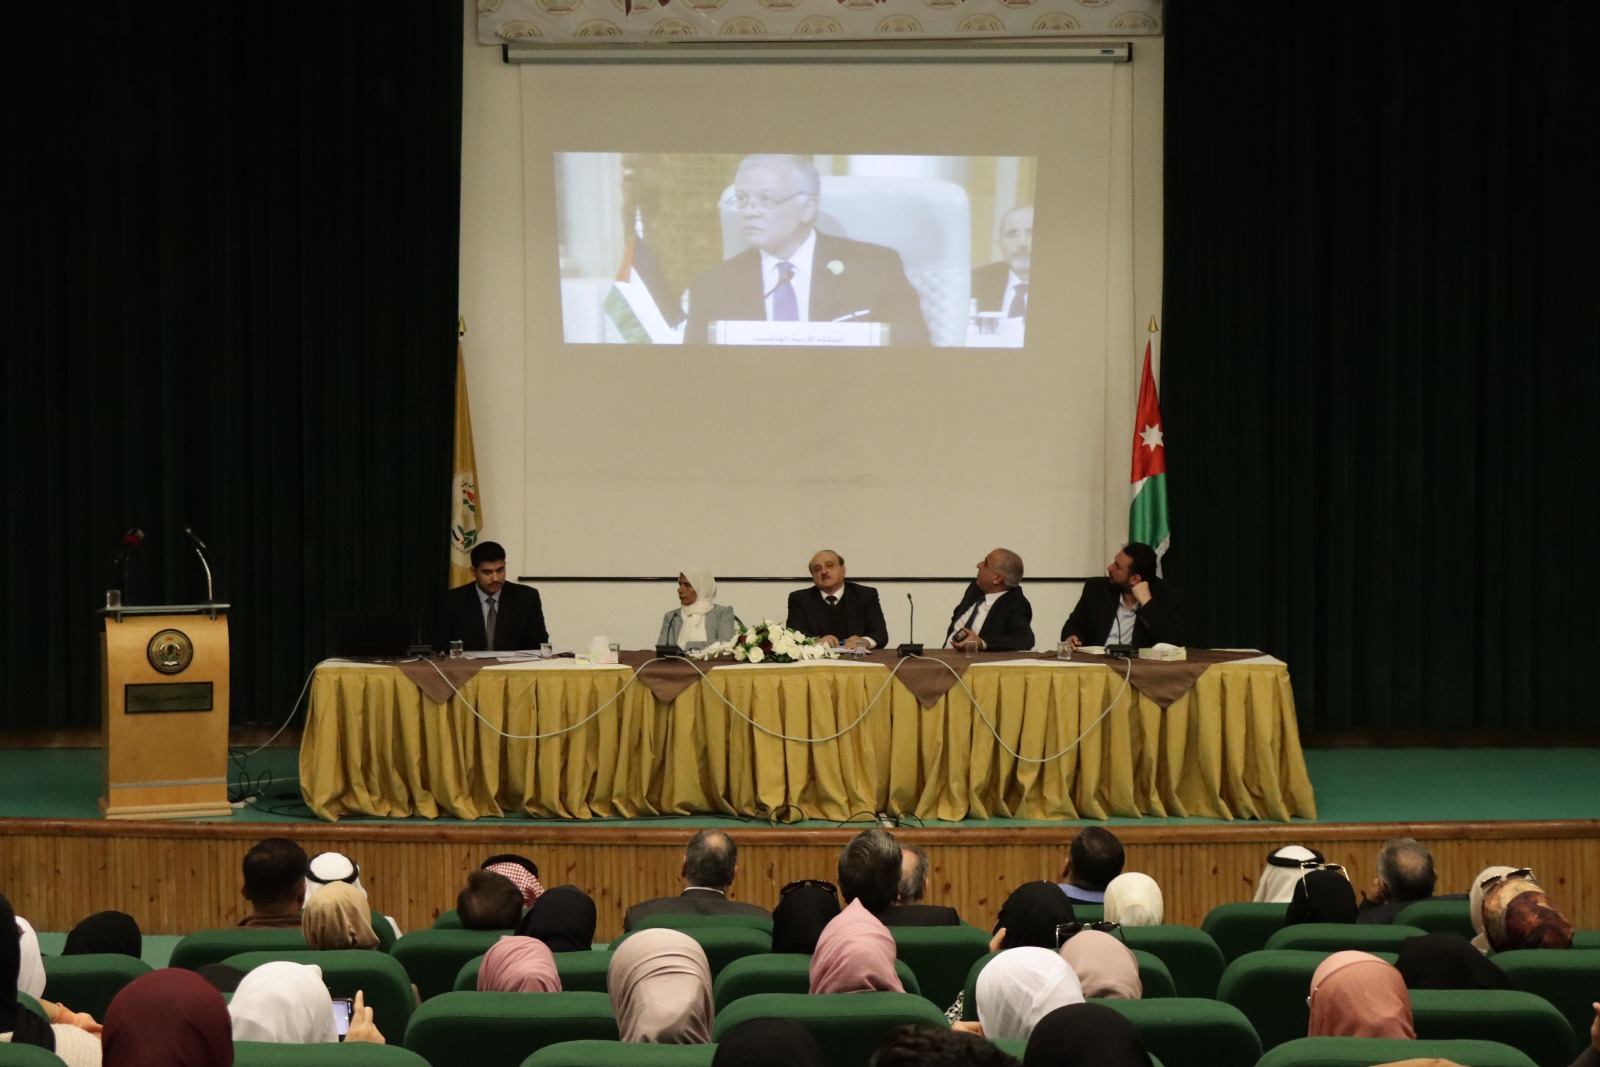 A dialogue symposium entitled “The Role of Jordan and the Hashemites in Defending the Palestinian Cause” at Al Hussein Bin Talal University